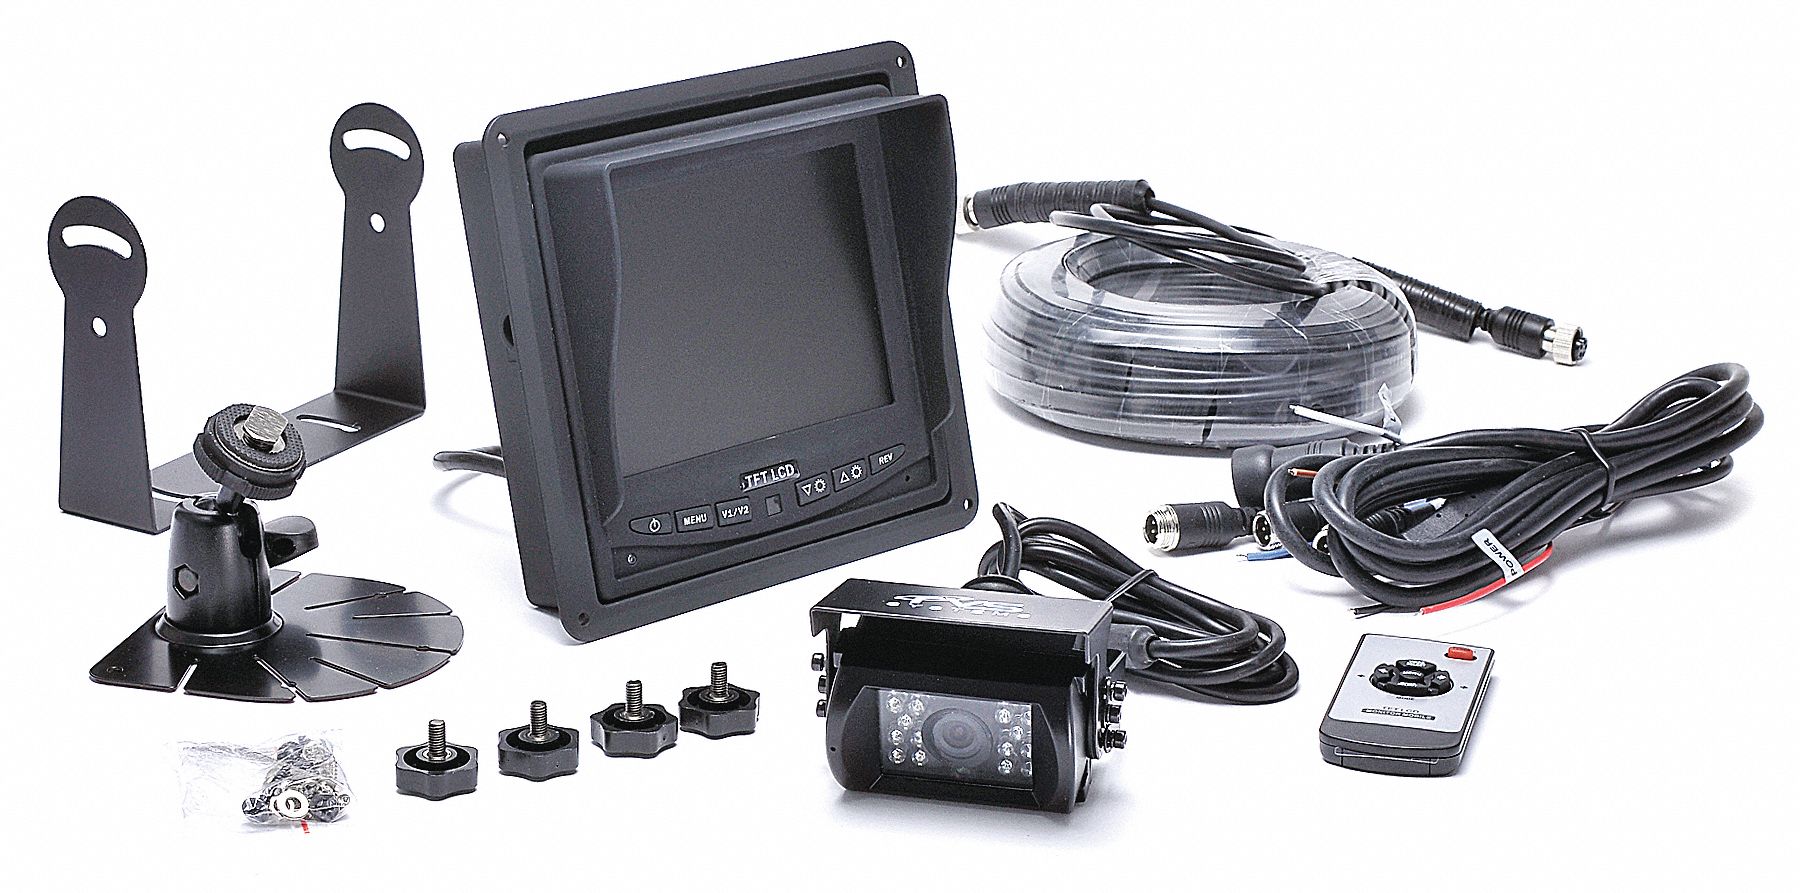 Rear View Camera System: CCD, TFT-LCD, 130° Viewing Angle